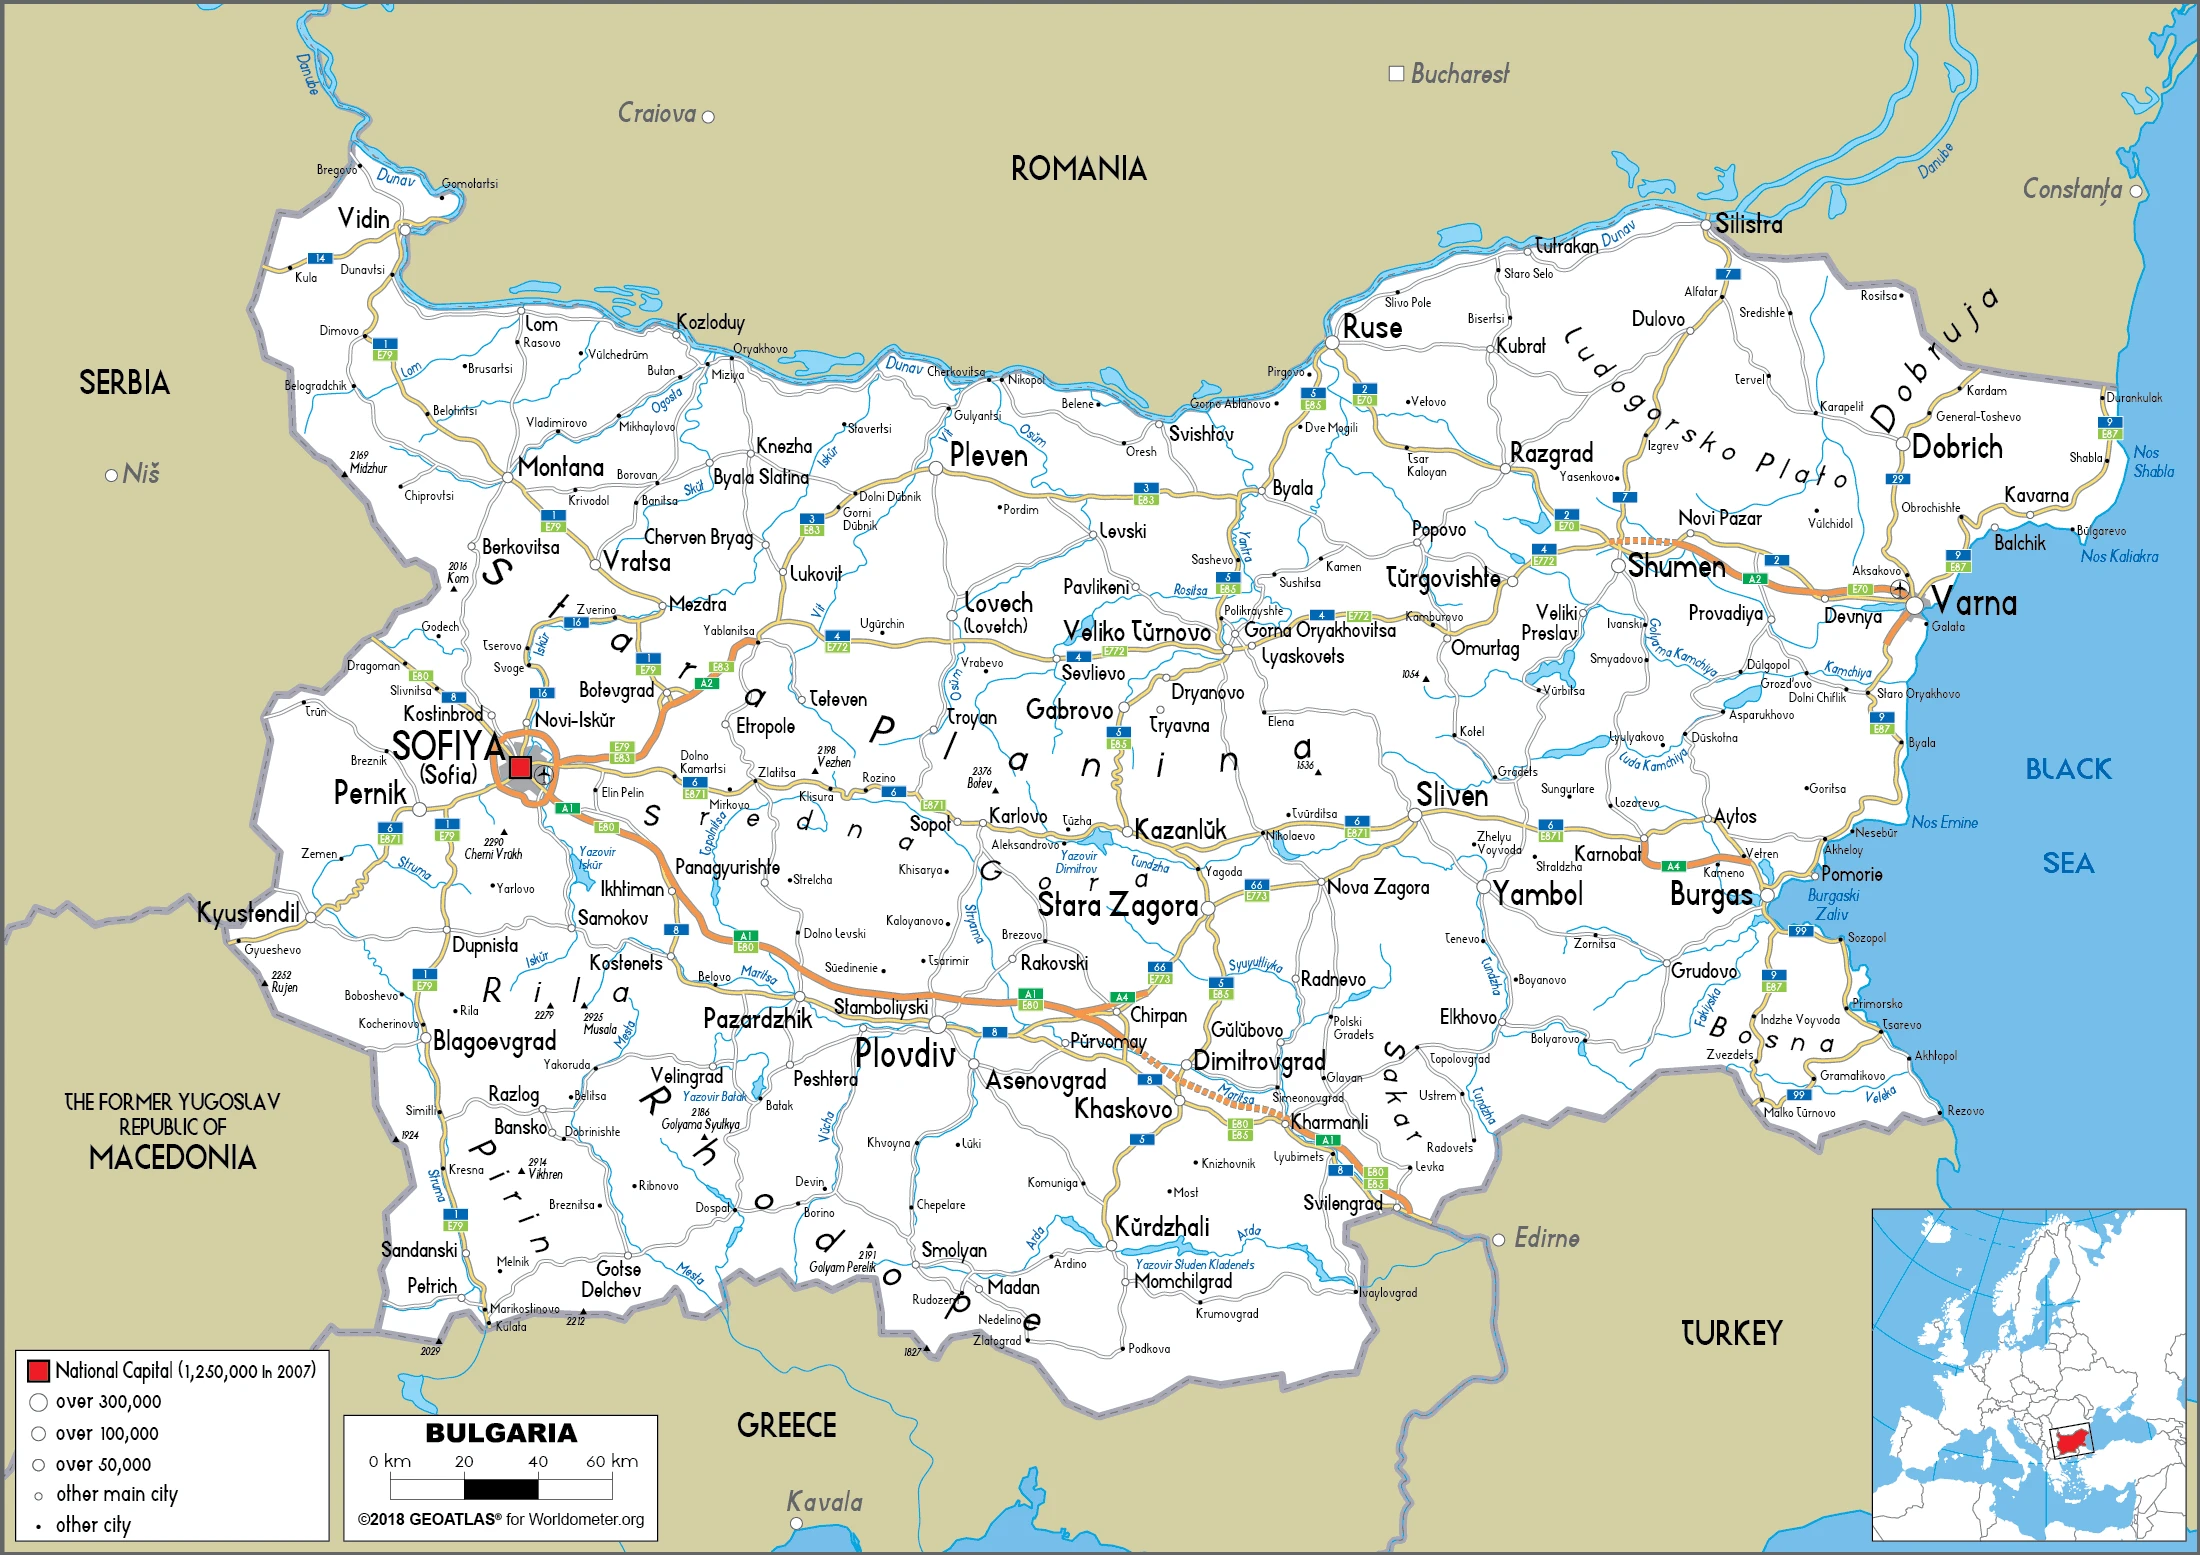 The route plan of the Bulgarian roadways.